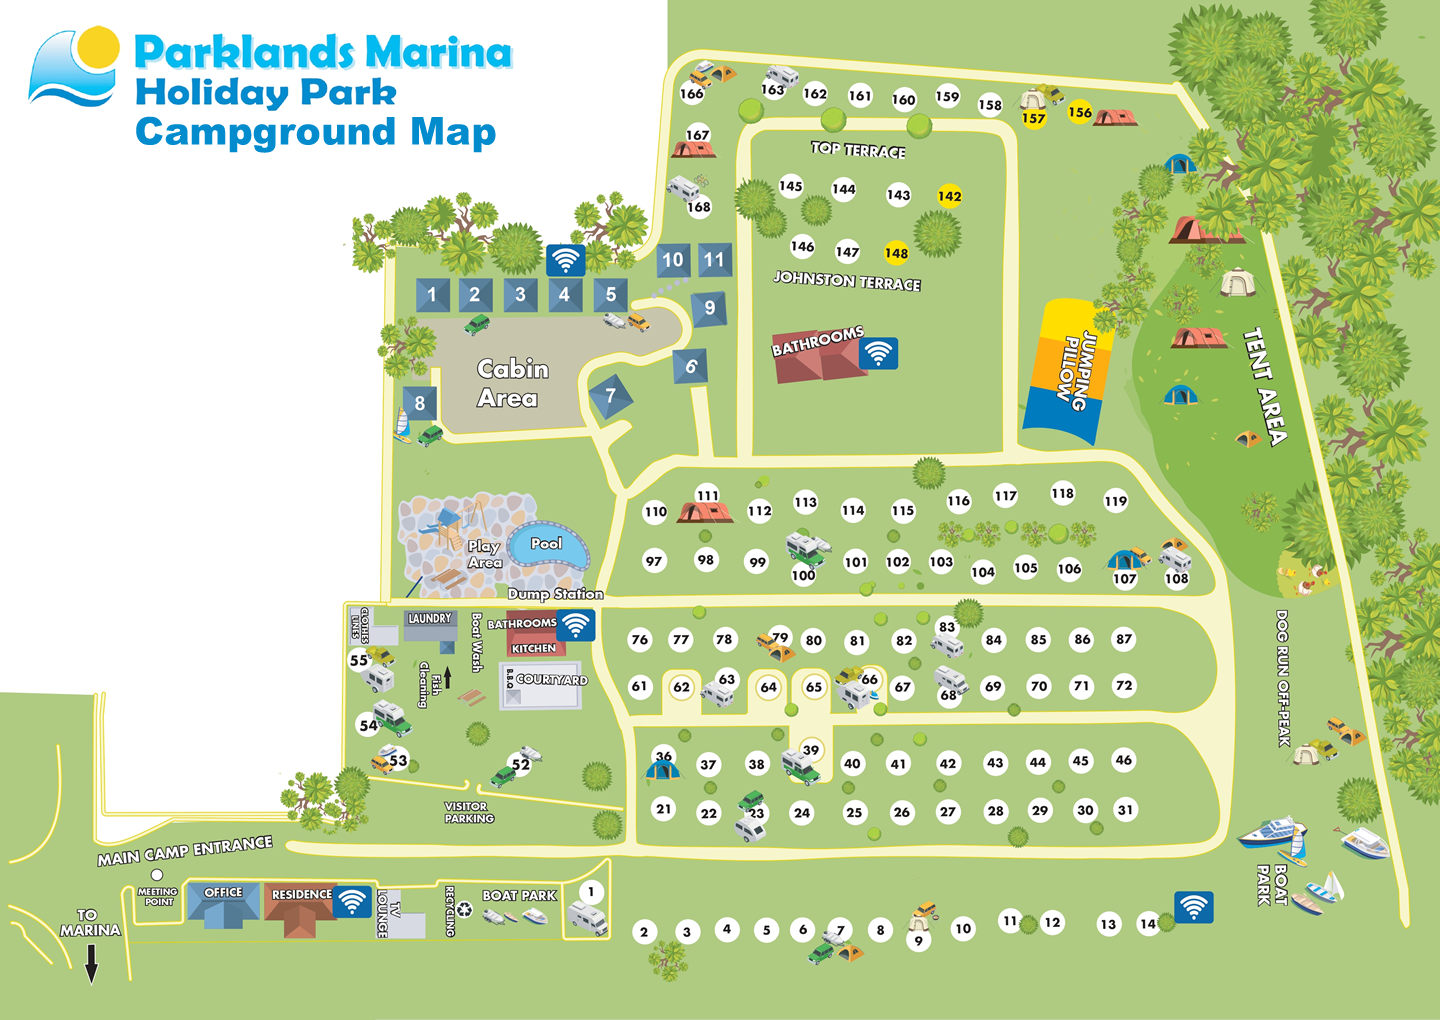 Campground Map for Parklands Marina Holiday Park in Picton NZ